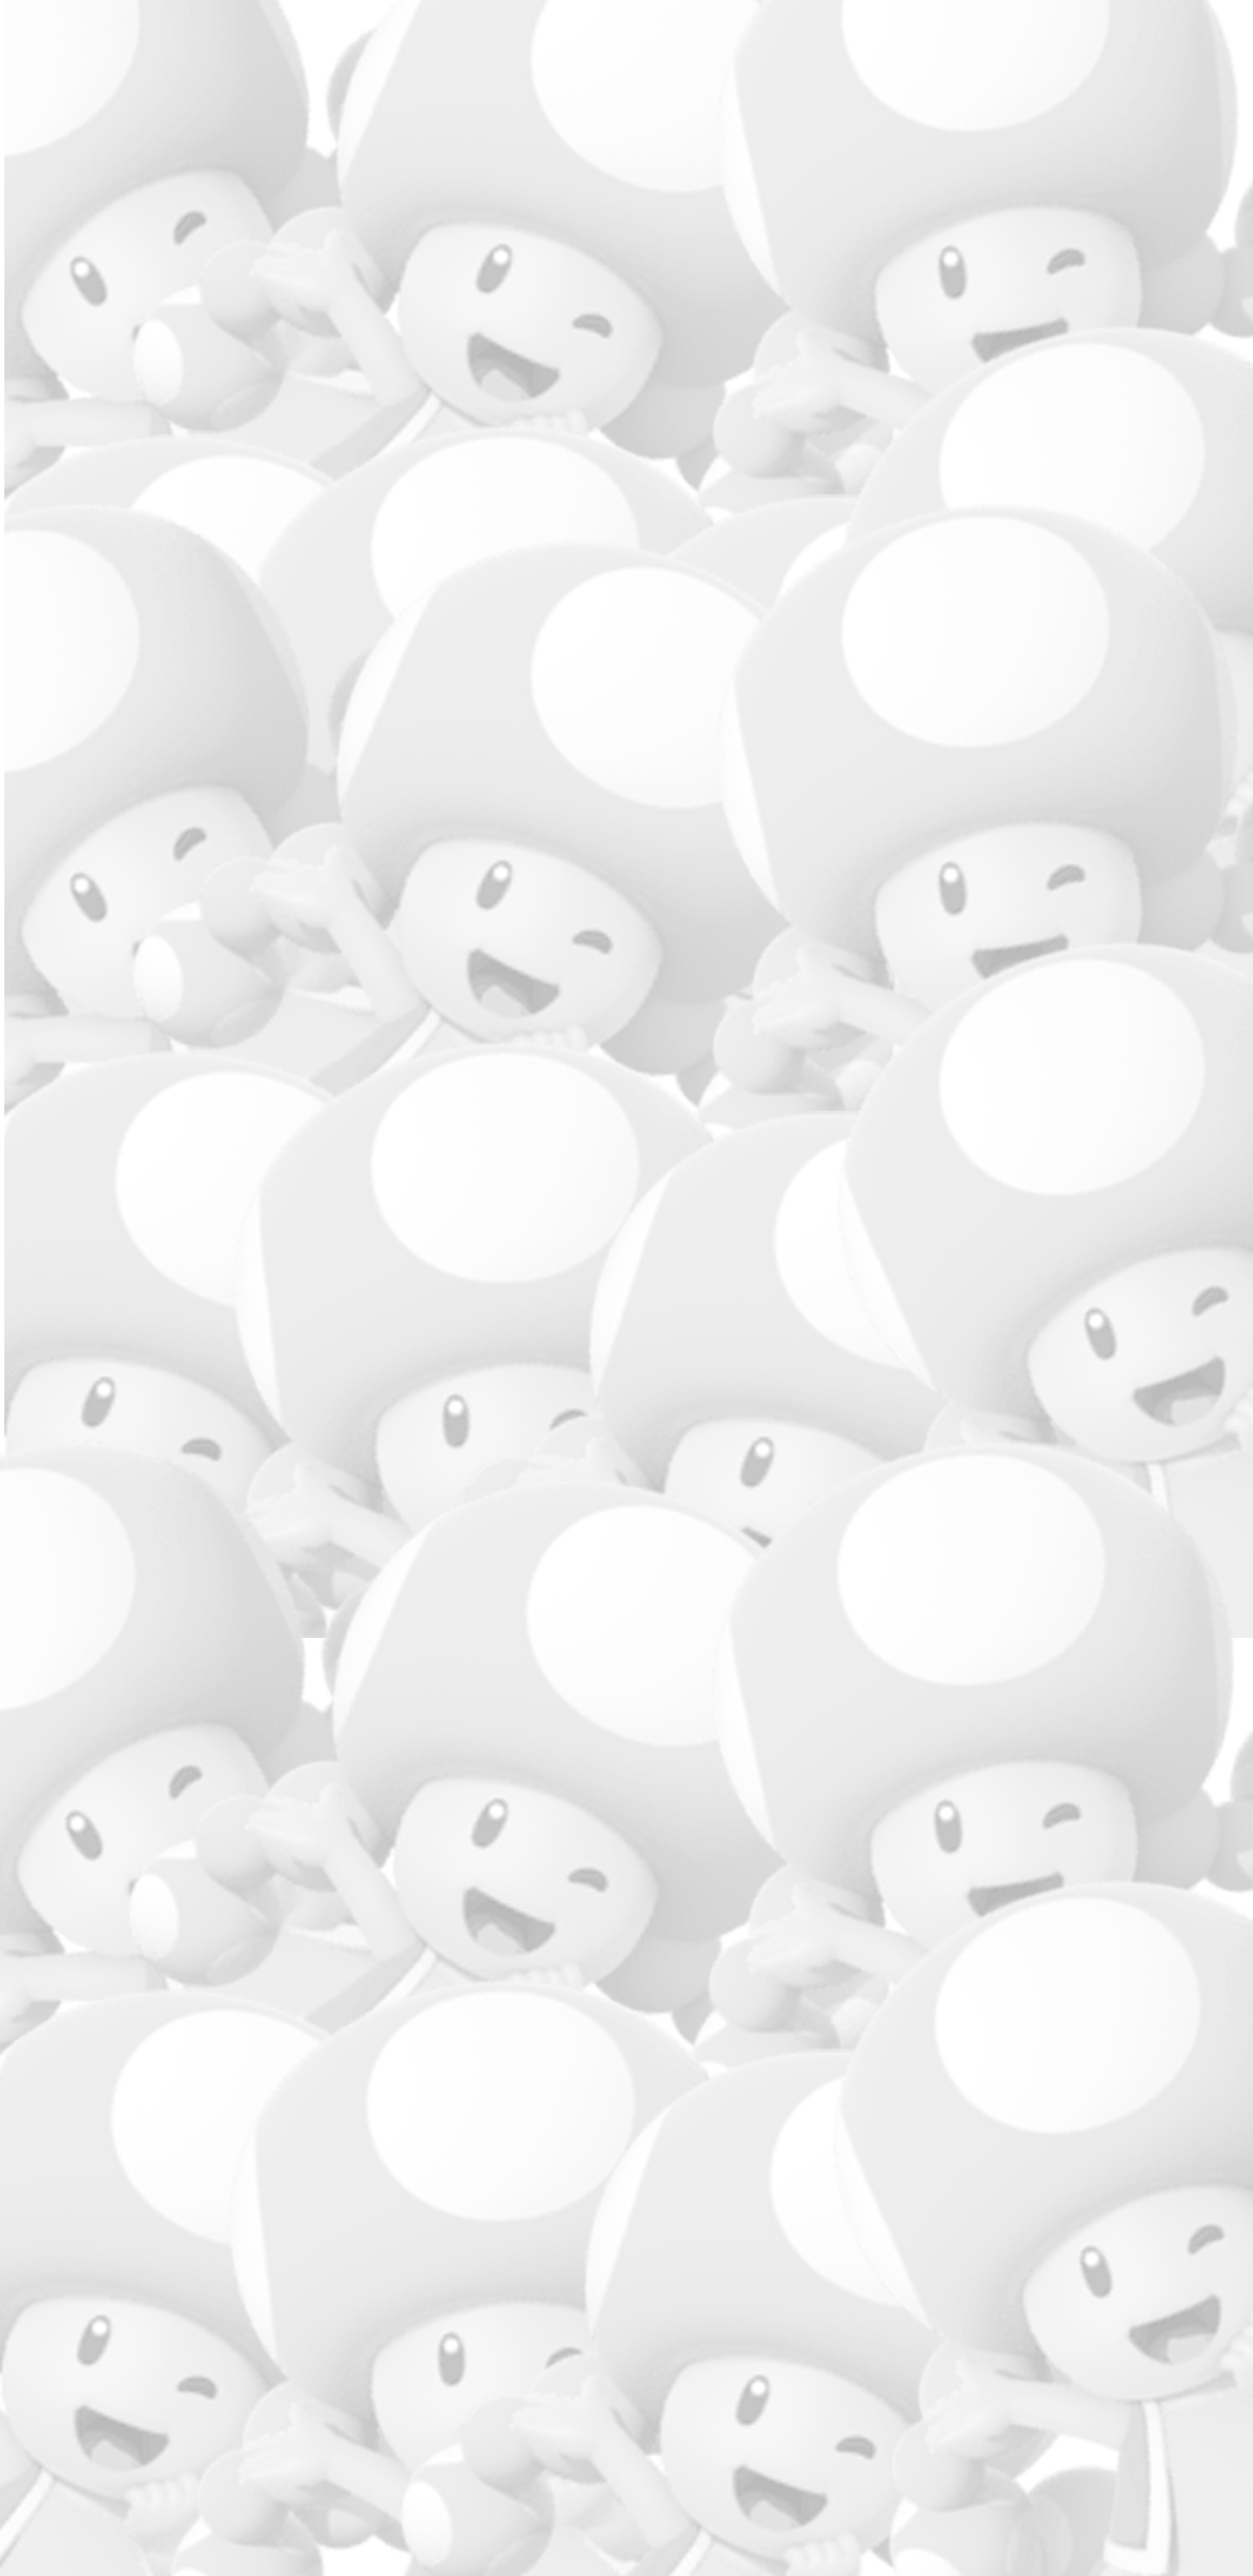 Black, white, background, wallpaper, pattern, minimal, iPhone, Android, toad, toadette, mario. Simple wallpaper, Minimal wallpaper, Wallpaper